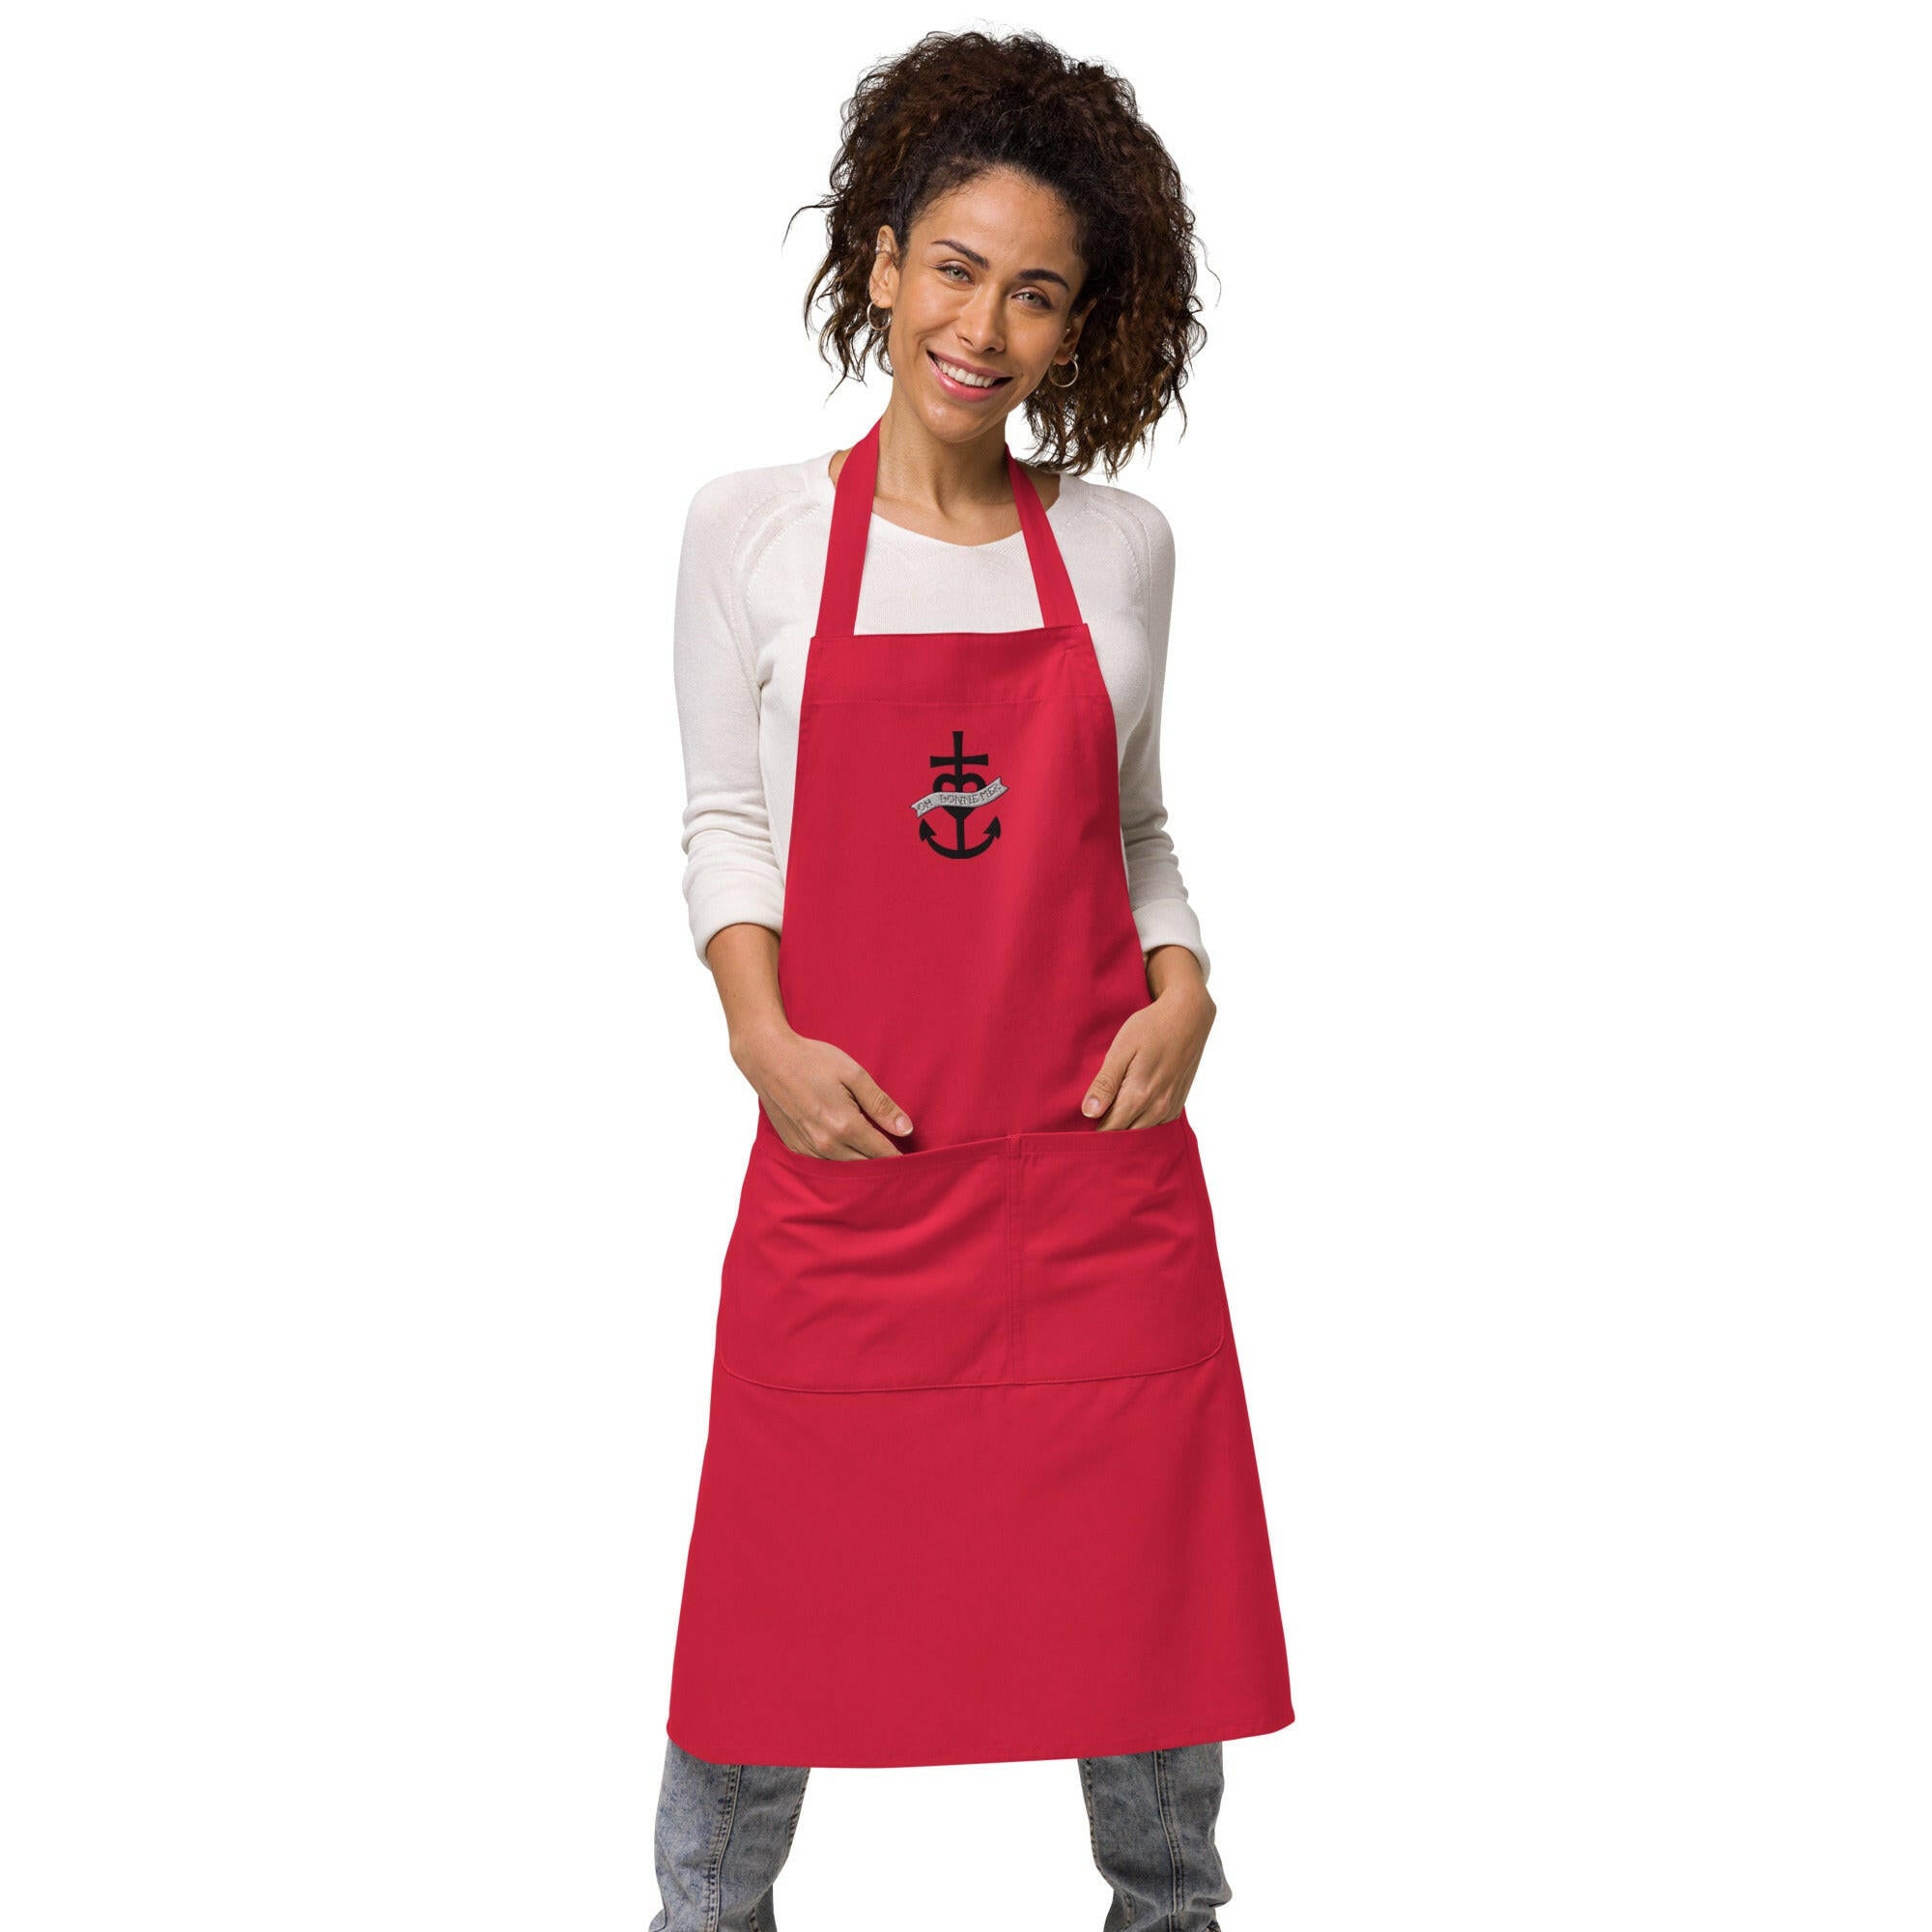 Organic cotton apron Oh Bonne Mer 1 embroidered pattern